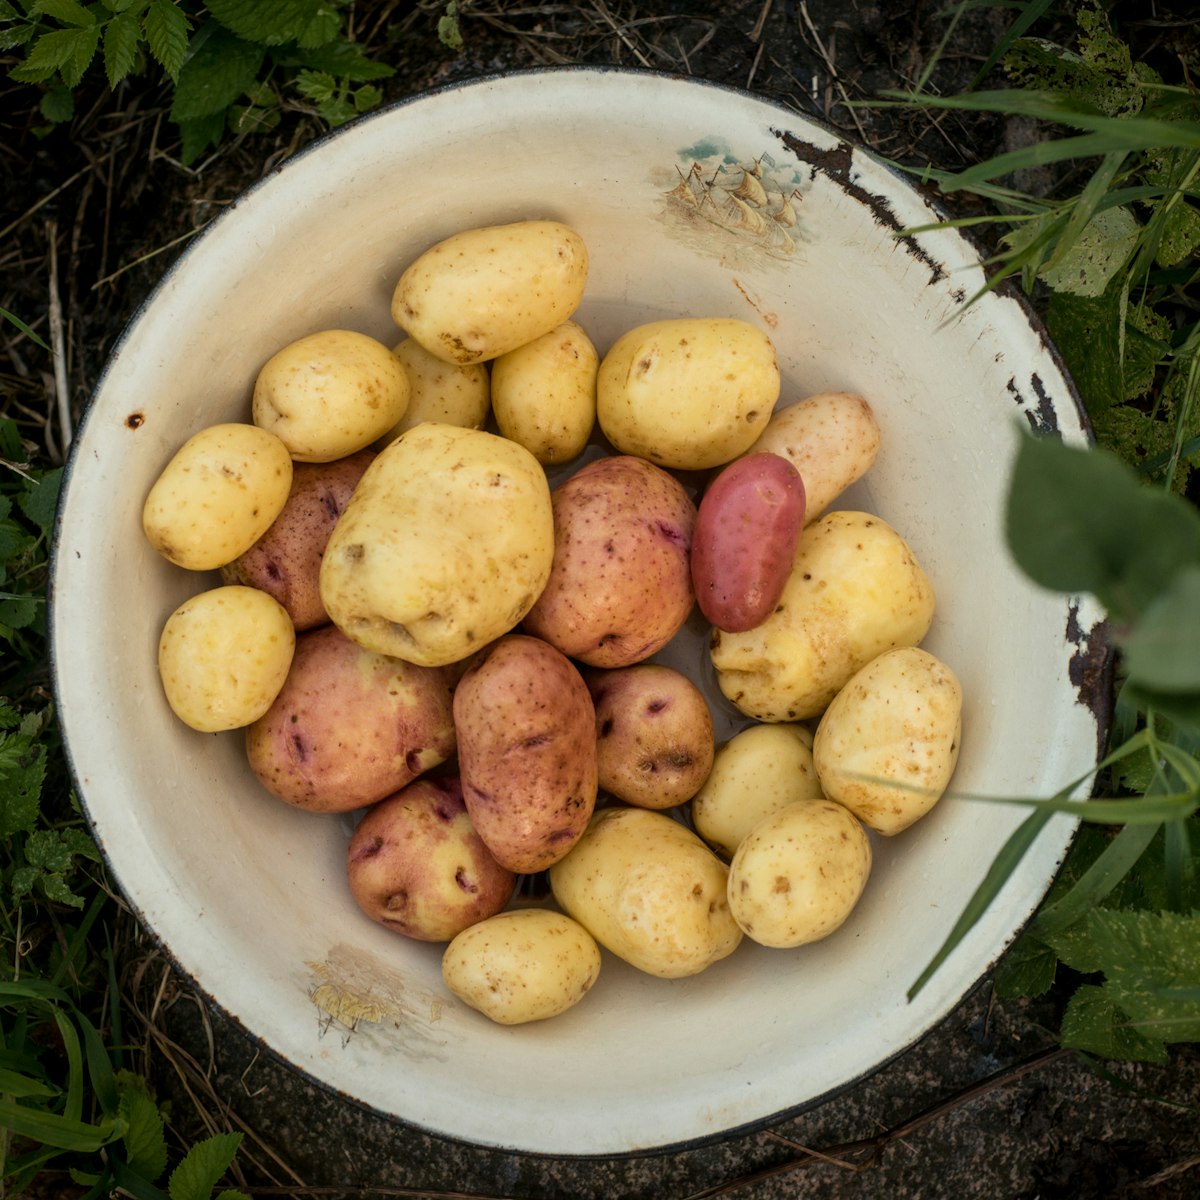 500px Photo ID: 107110067 - Fresh potatoes! Out of the ground into my mouth ;)